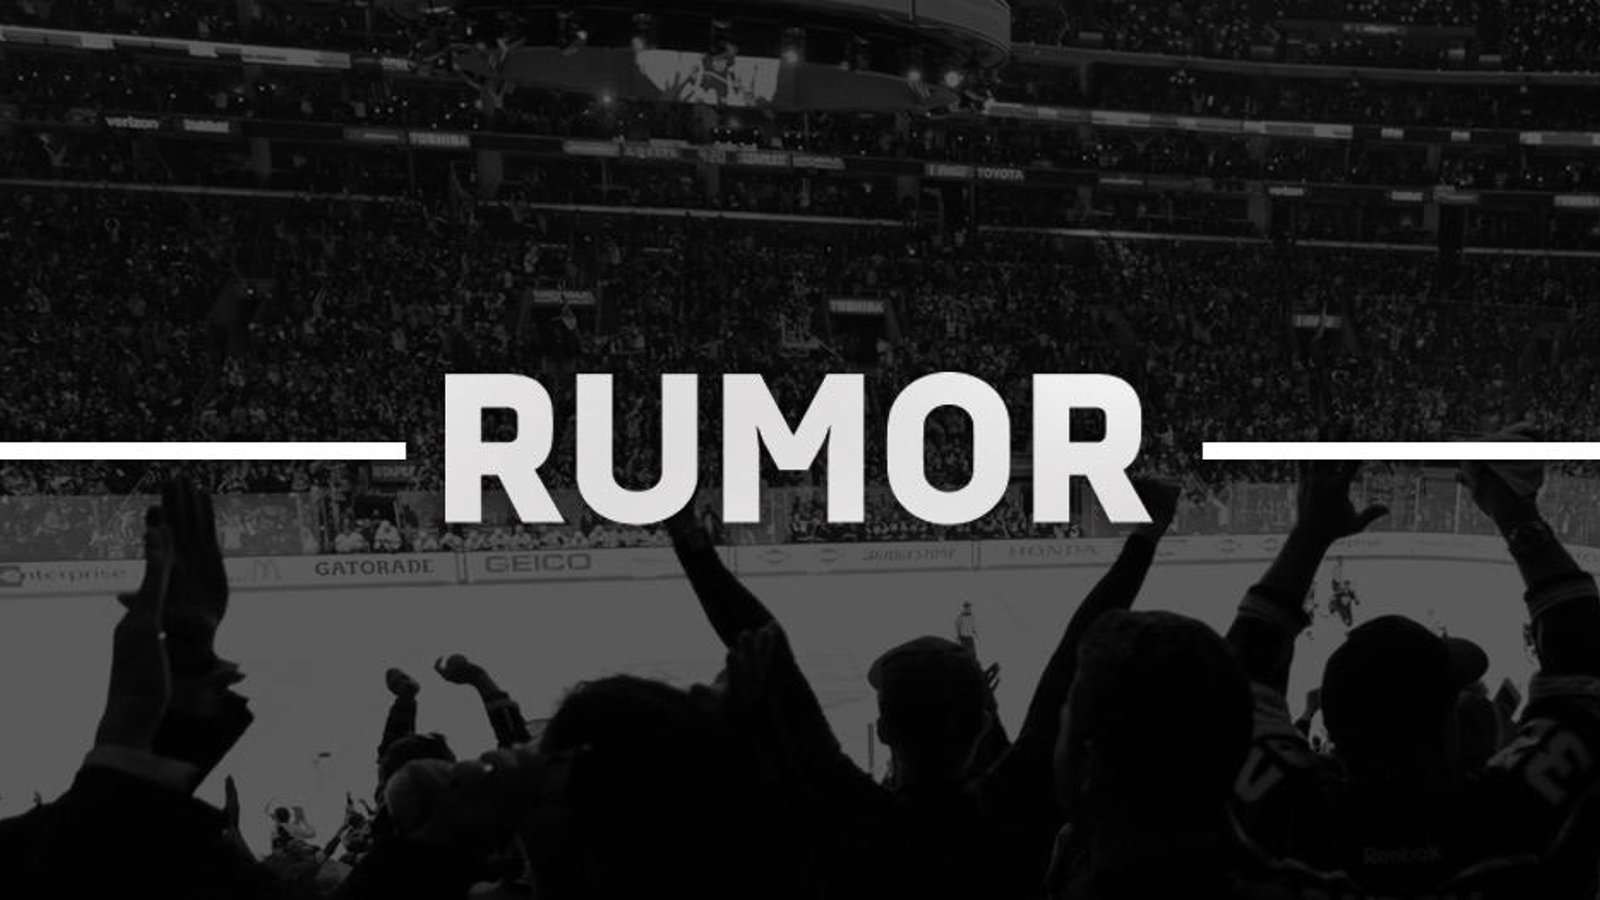 Rumor: Player heavily involved in trade talks absent from practice. 